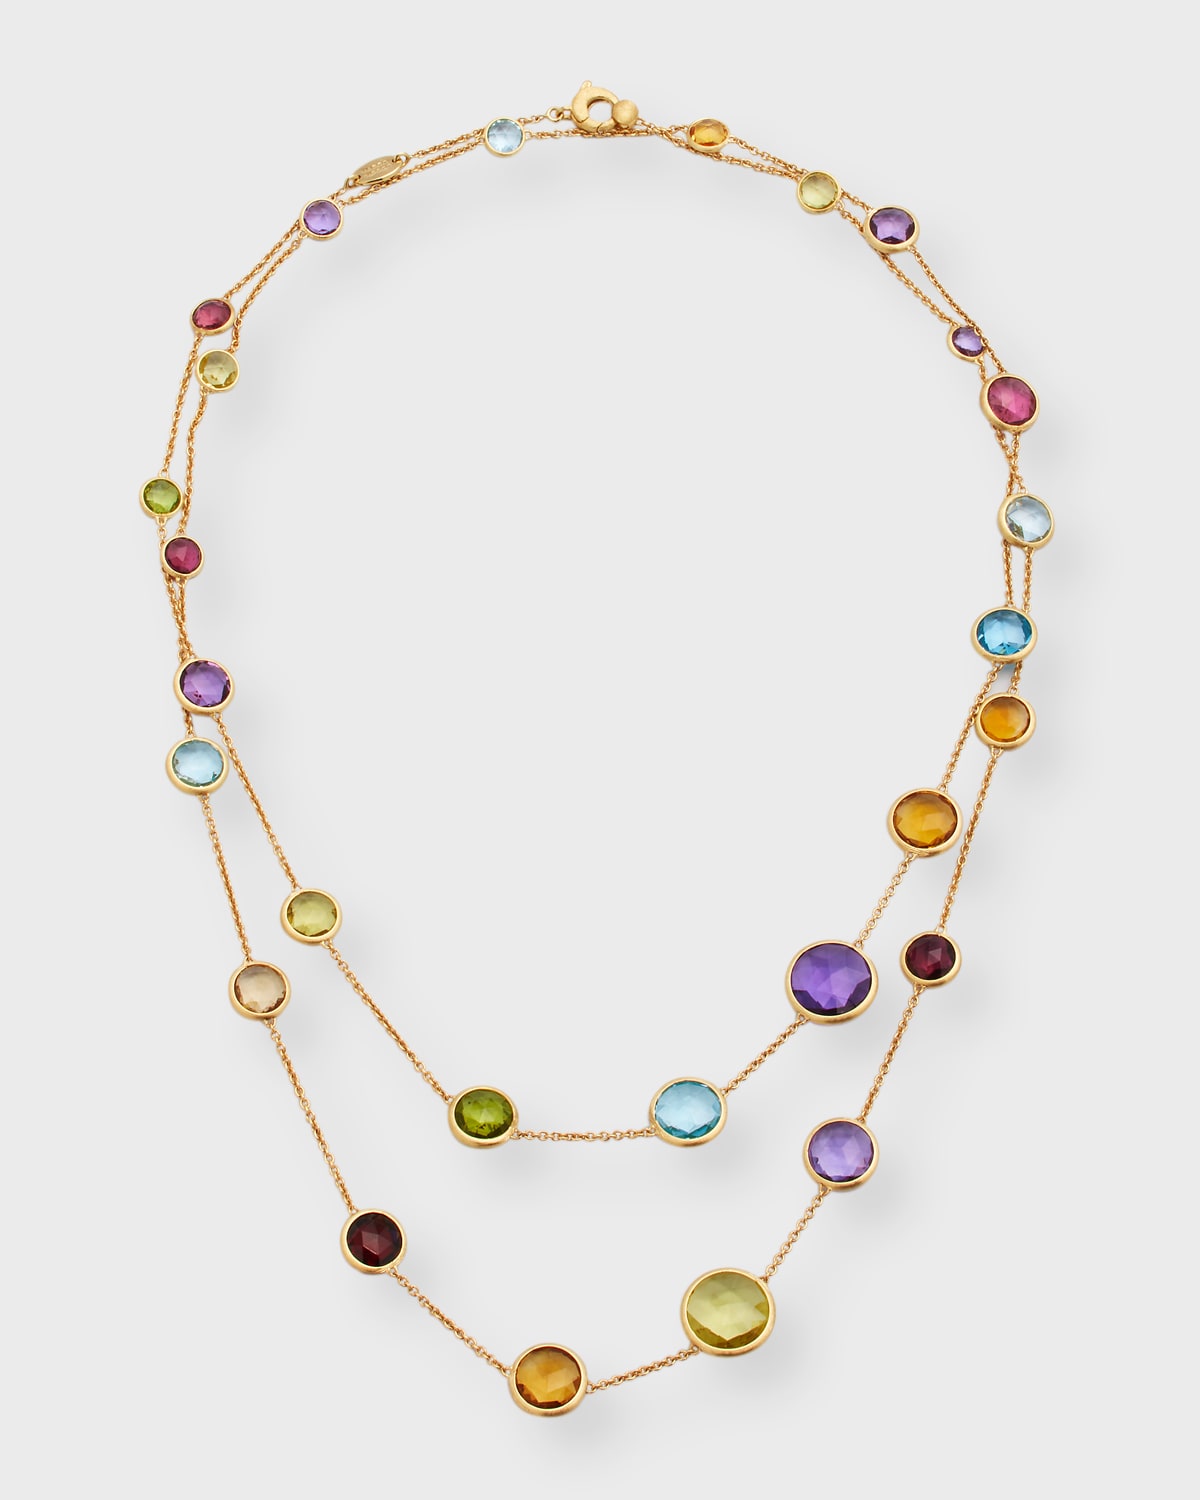 Marco Bicego Jaipur Color Long Necklace with Mixed Stones, 36"L